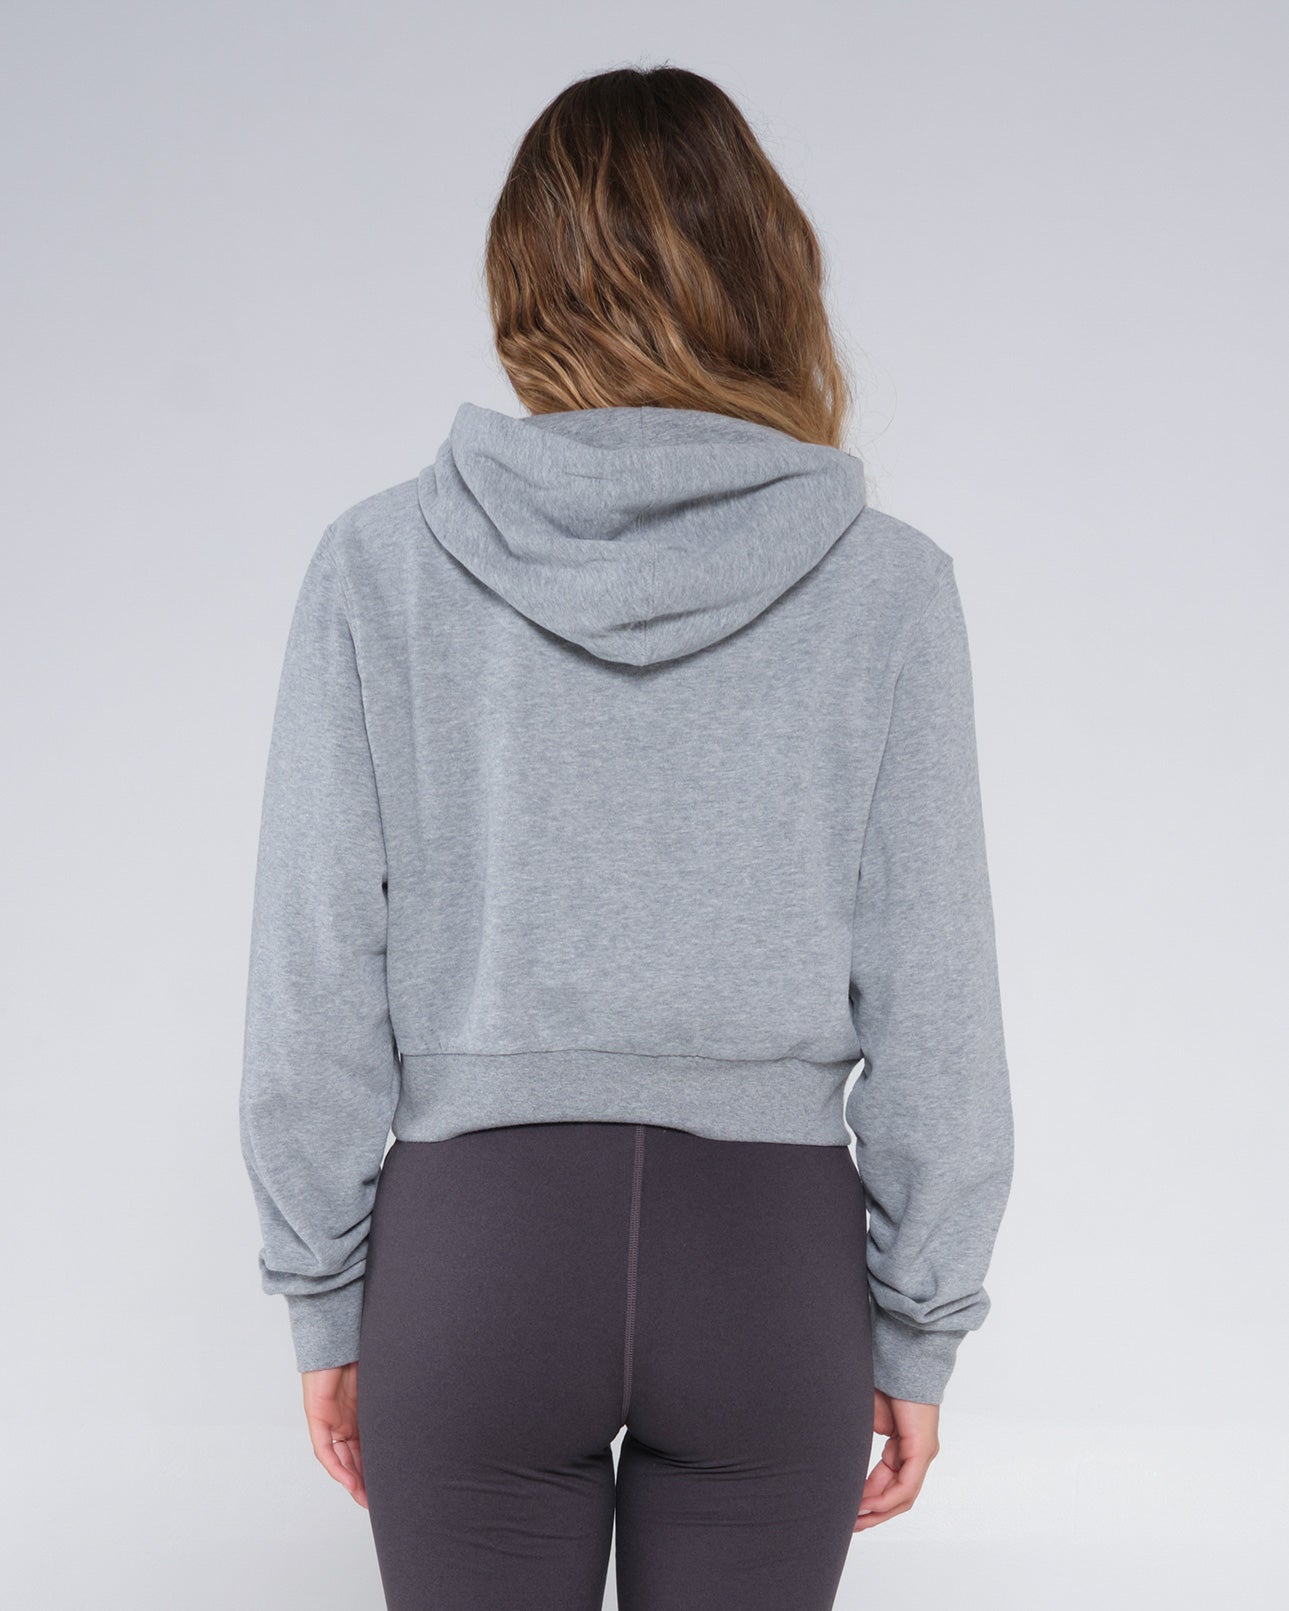 On body back of the Summer Vibe Heather Grey Crop Hoody